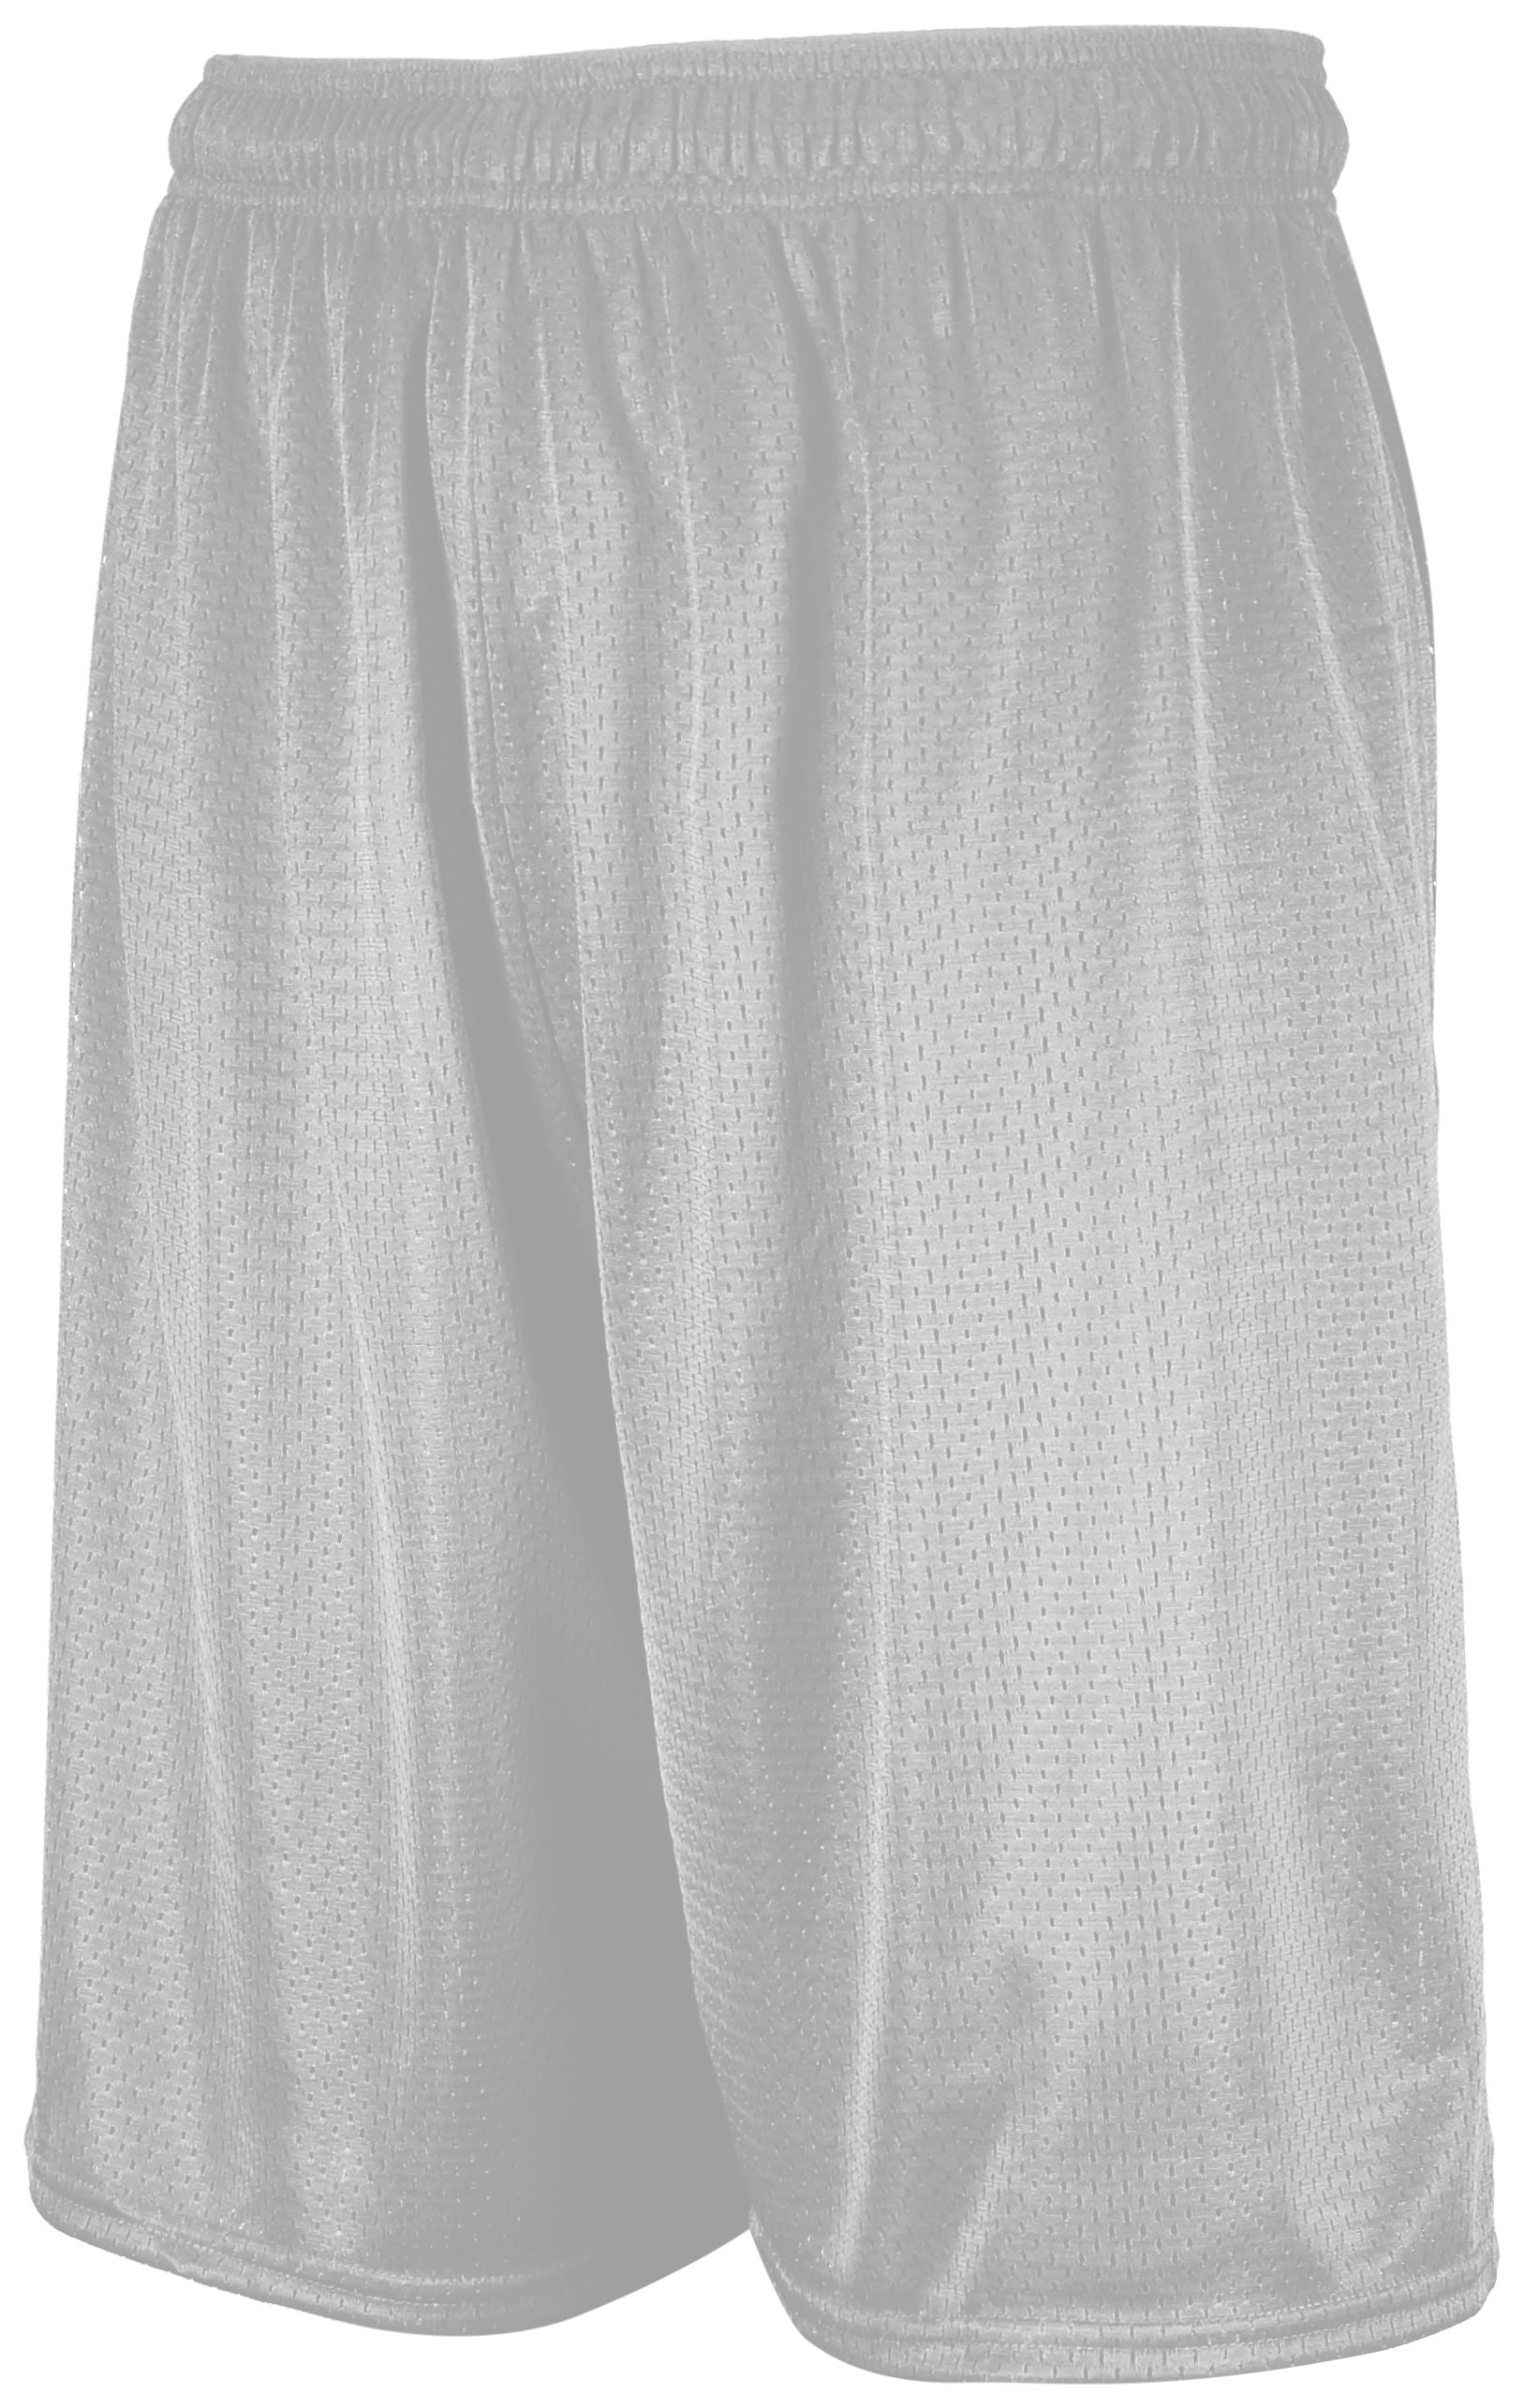 Russell Athletic Youth Dri-Power Mesh Shorts in Gridiron Silver  -Part of the Youth, Youth-Shorts, Russell-Athletic-Products product lines at KanaleyCreations.com